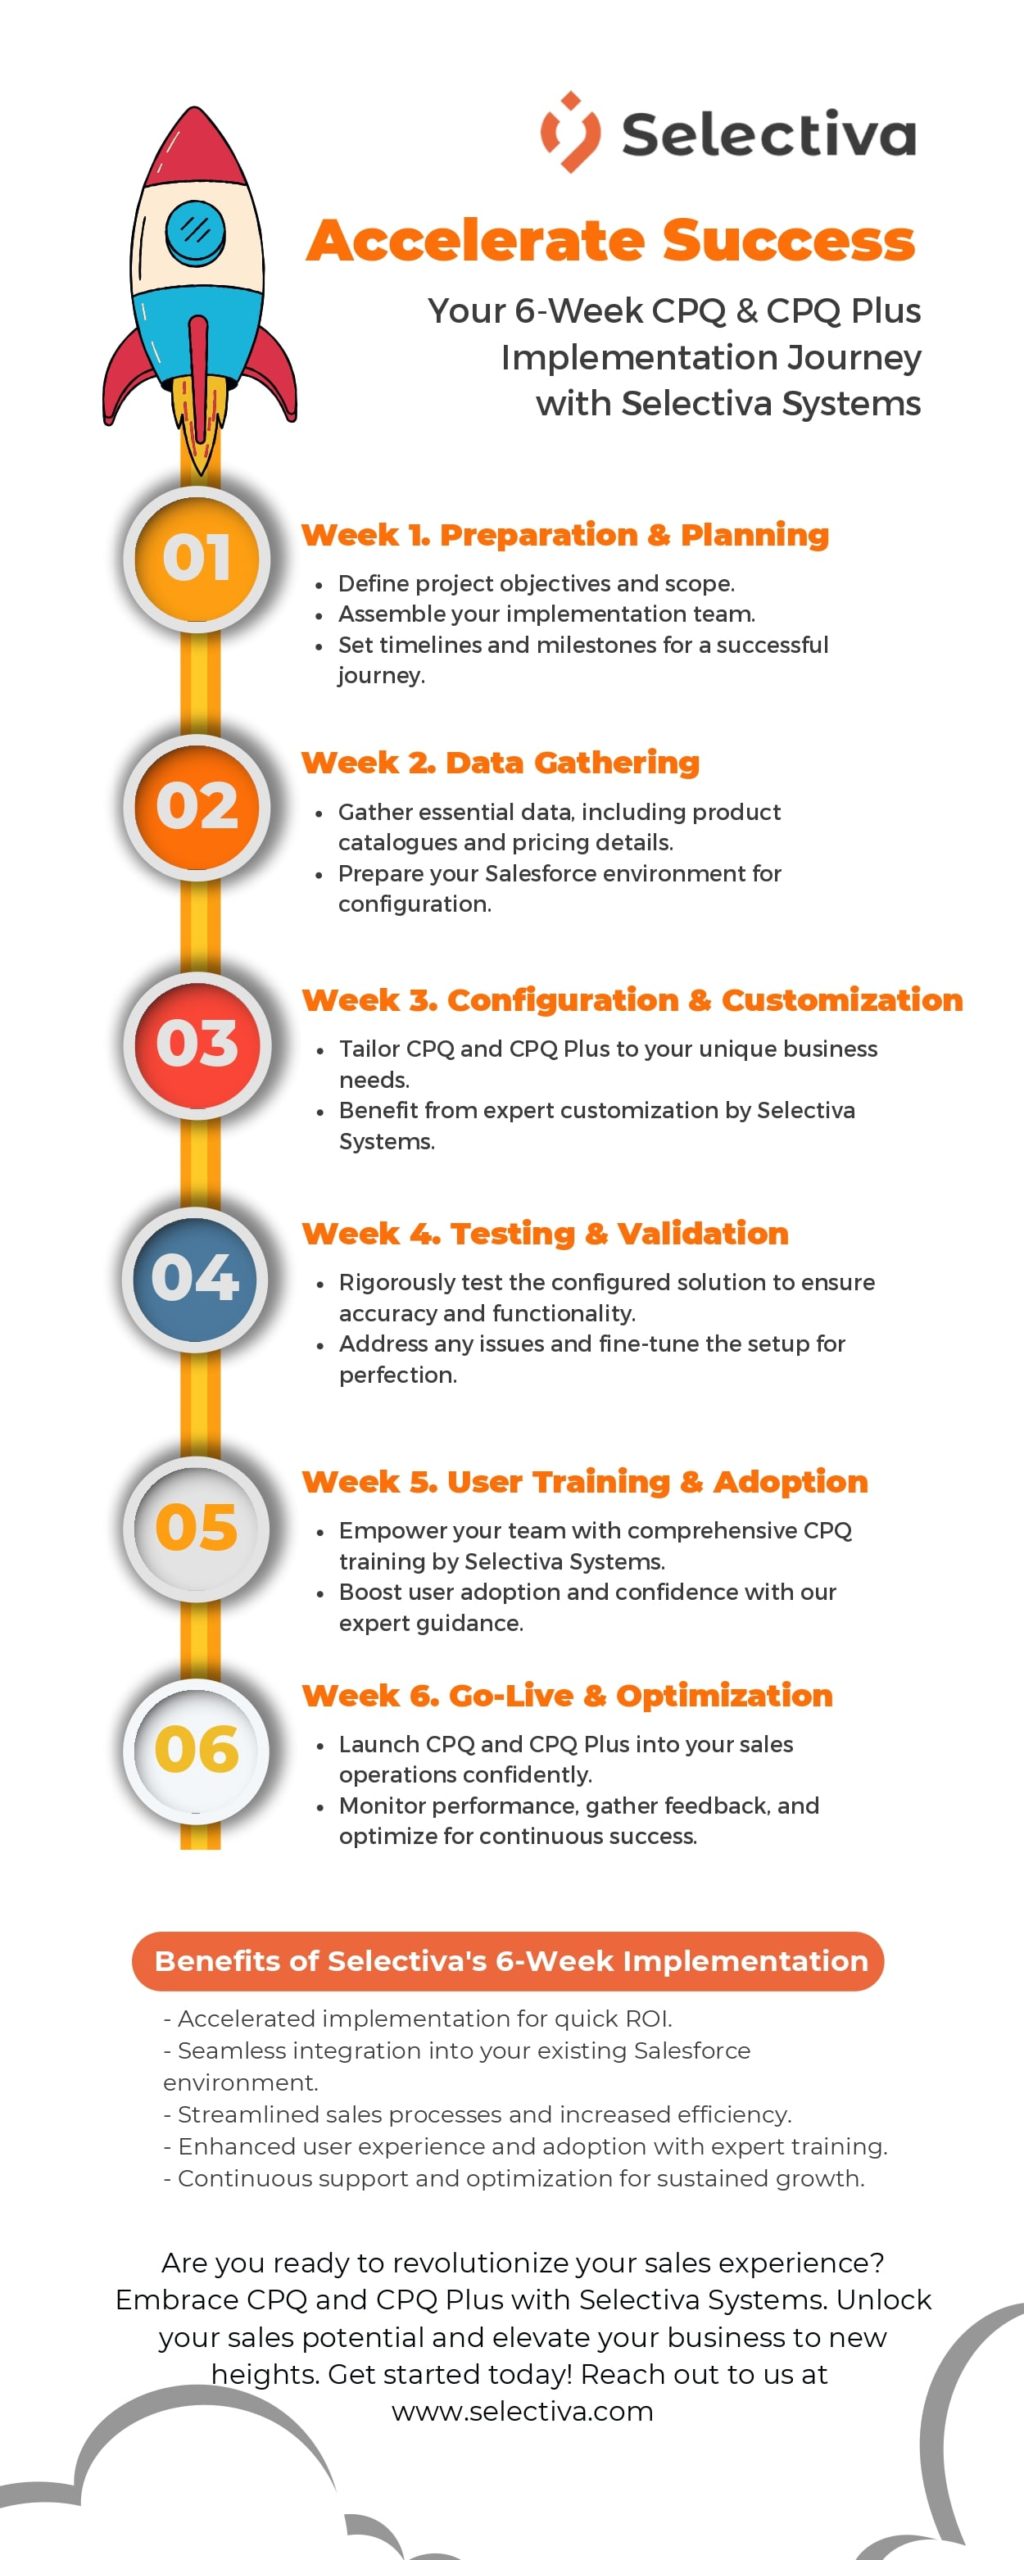 Accelerate success with our 6 weeks CPQ & CPQ Plus Implementation Journey_Image.